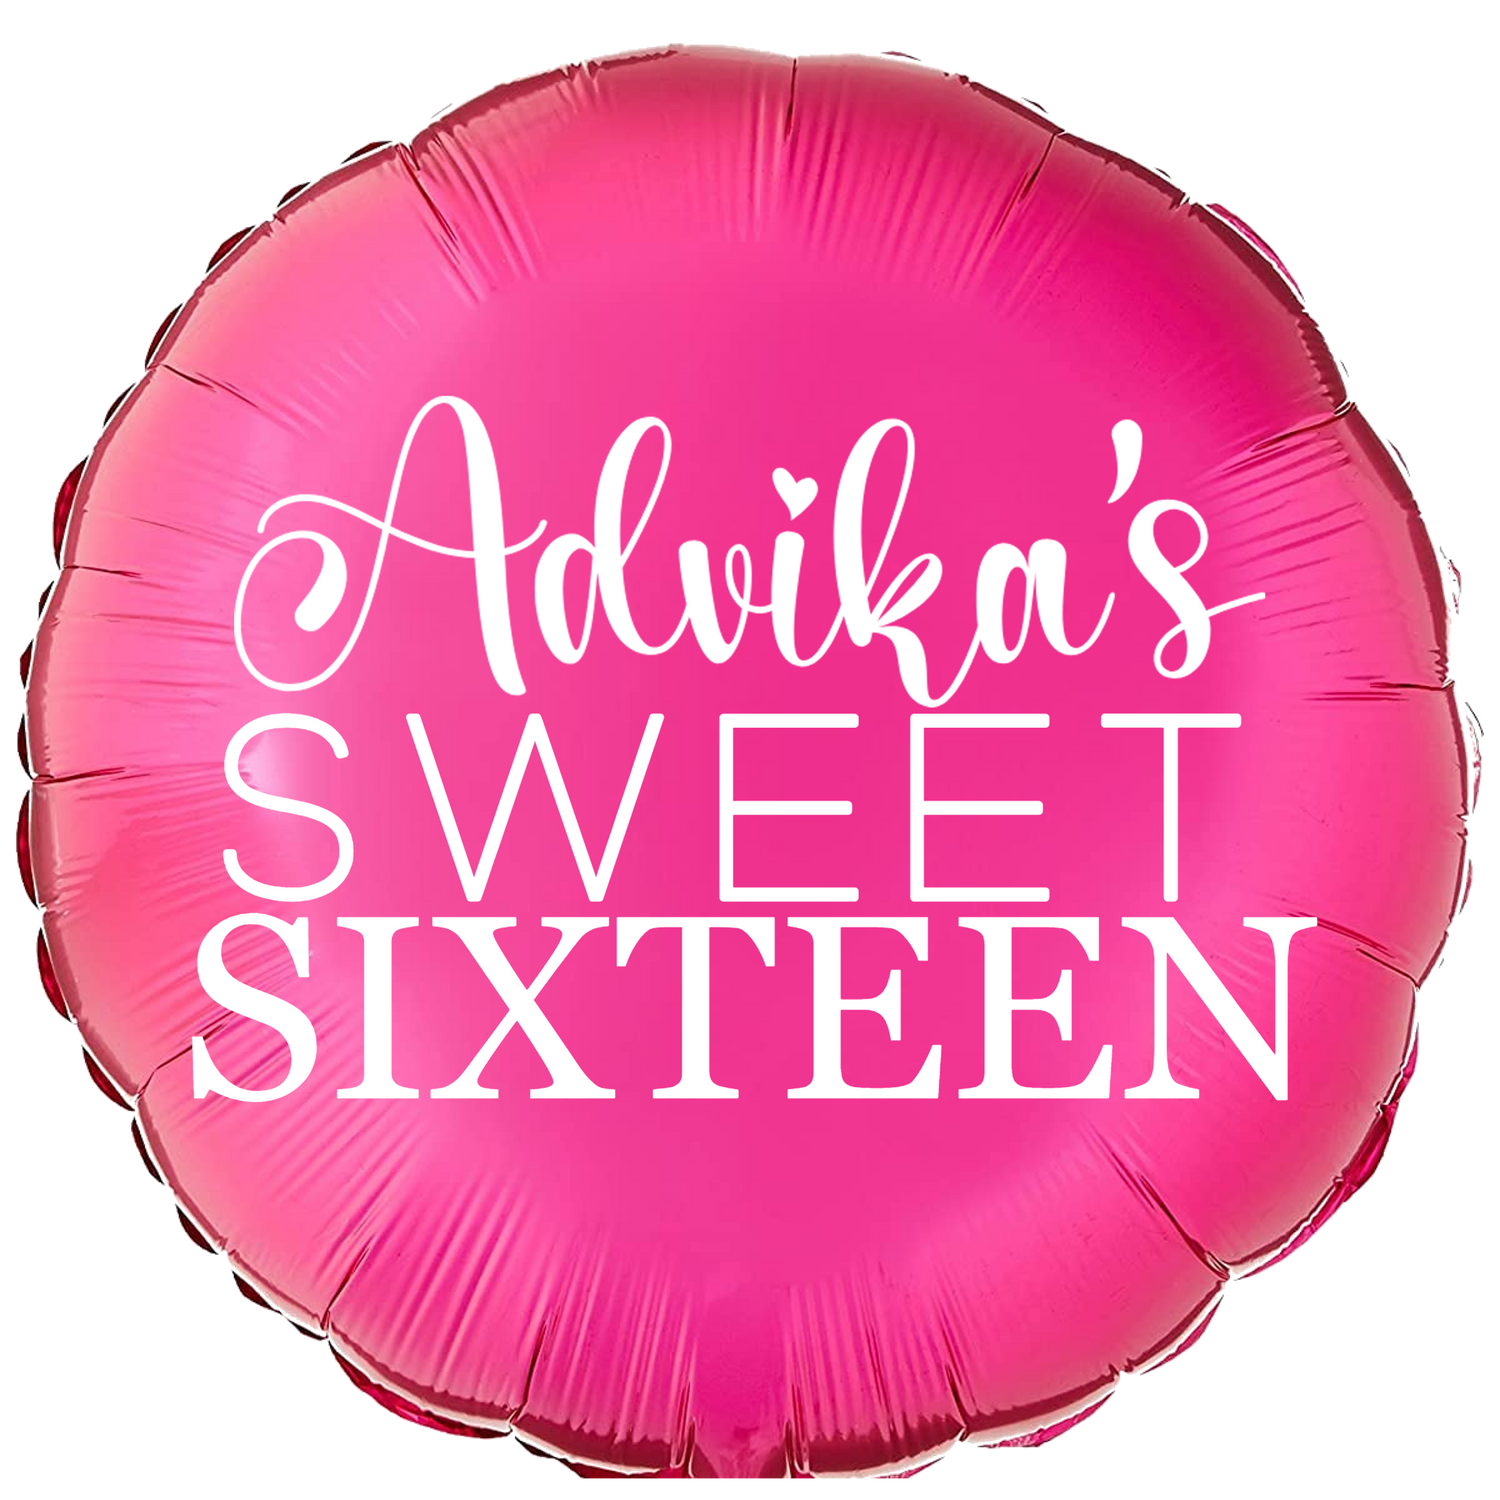 Custom Name/Text/Message Hot Pink Round Personalized Balloons For Sixteenth Birthday Party Event. Supports Helium/Air, Luxury Bespoke Balloons Are Perfect To Surprise Your Friends/Siblings/Girlfriend On Their 16Th Birthday. Perfect For Indoor And Outdoor Decorations, Surprise Parties, Room & Hall Decorations.